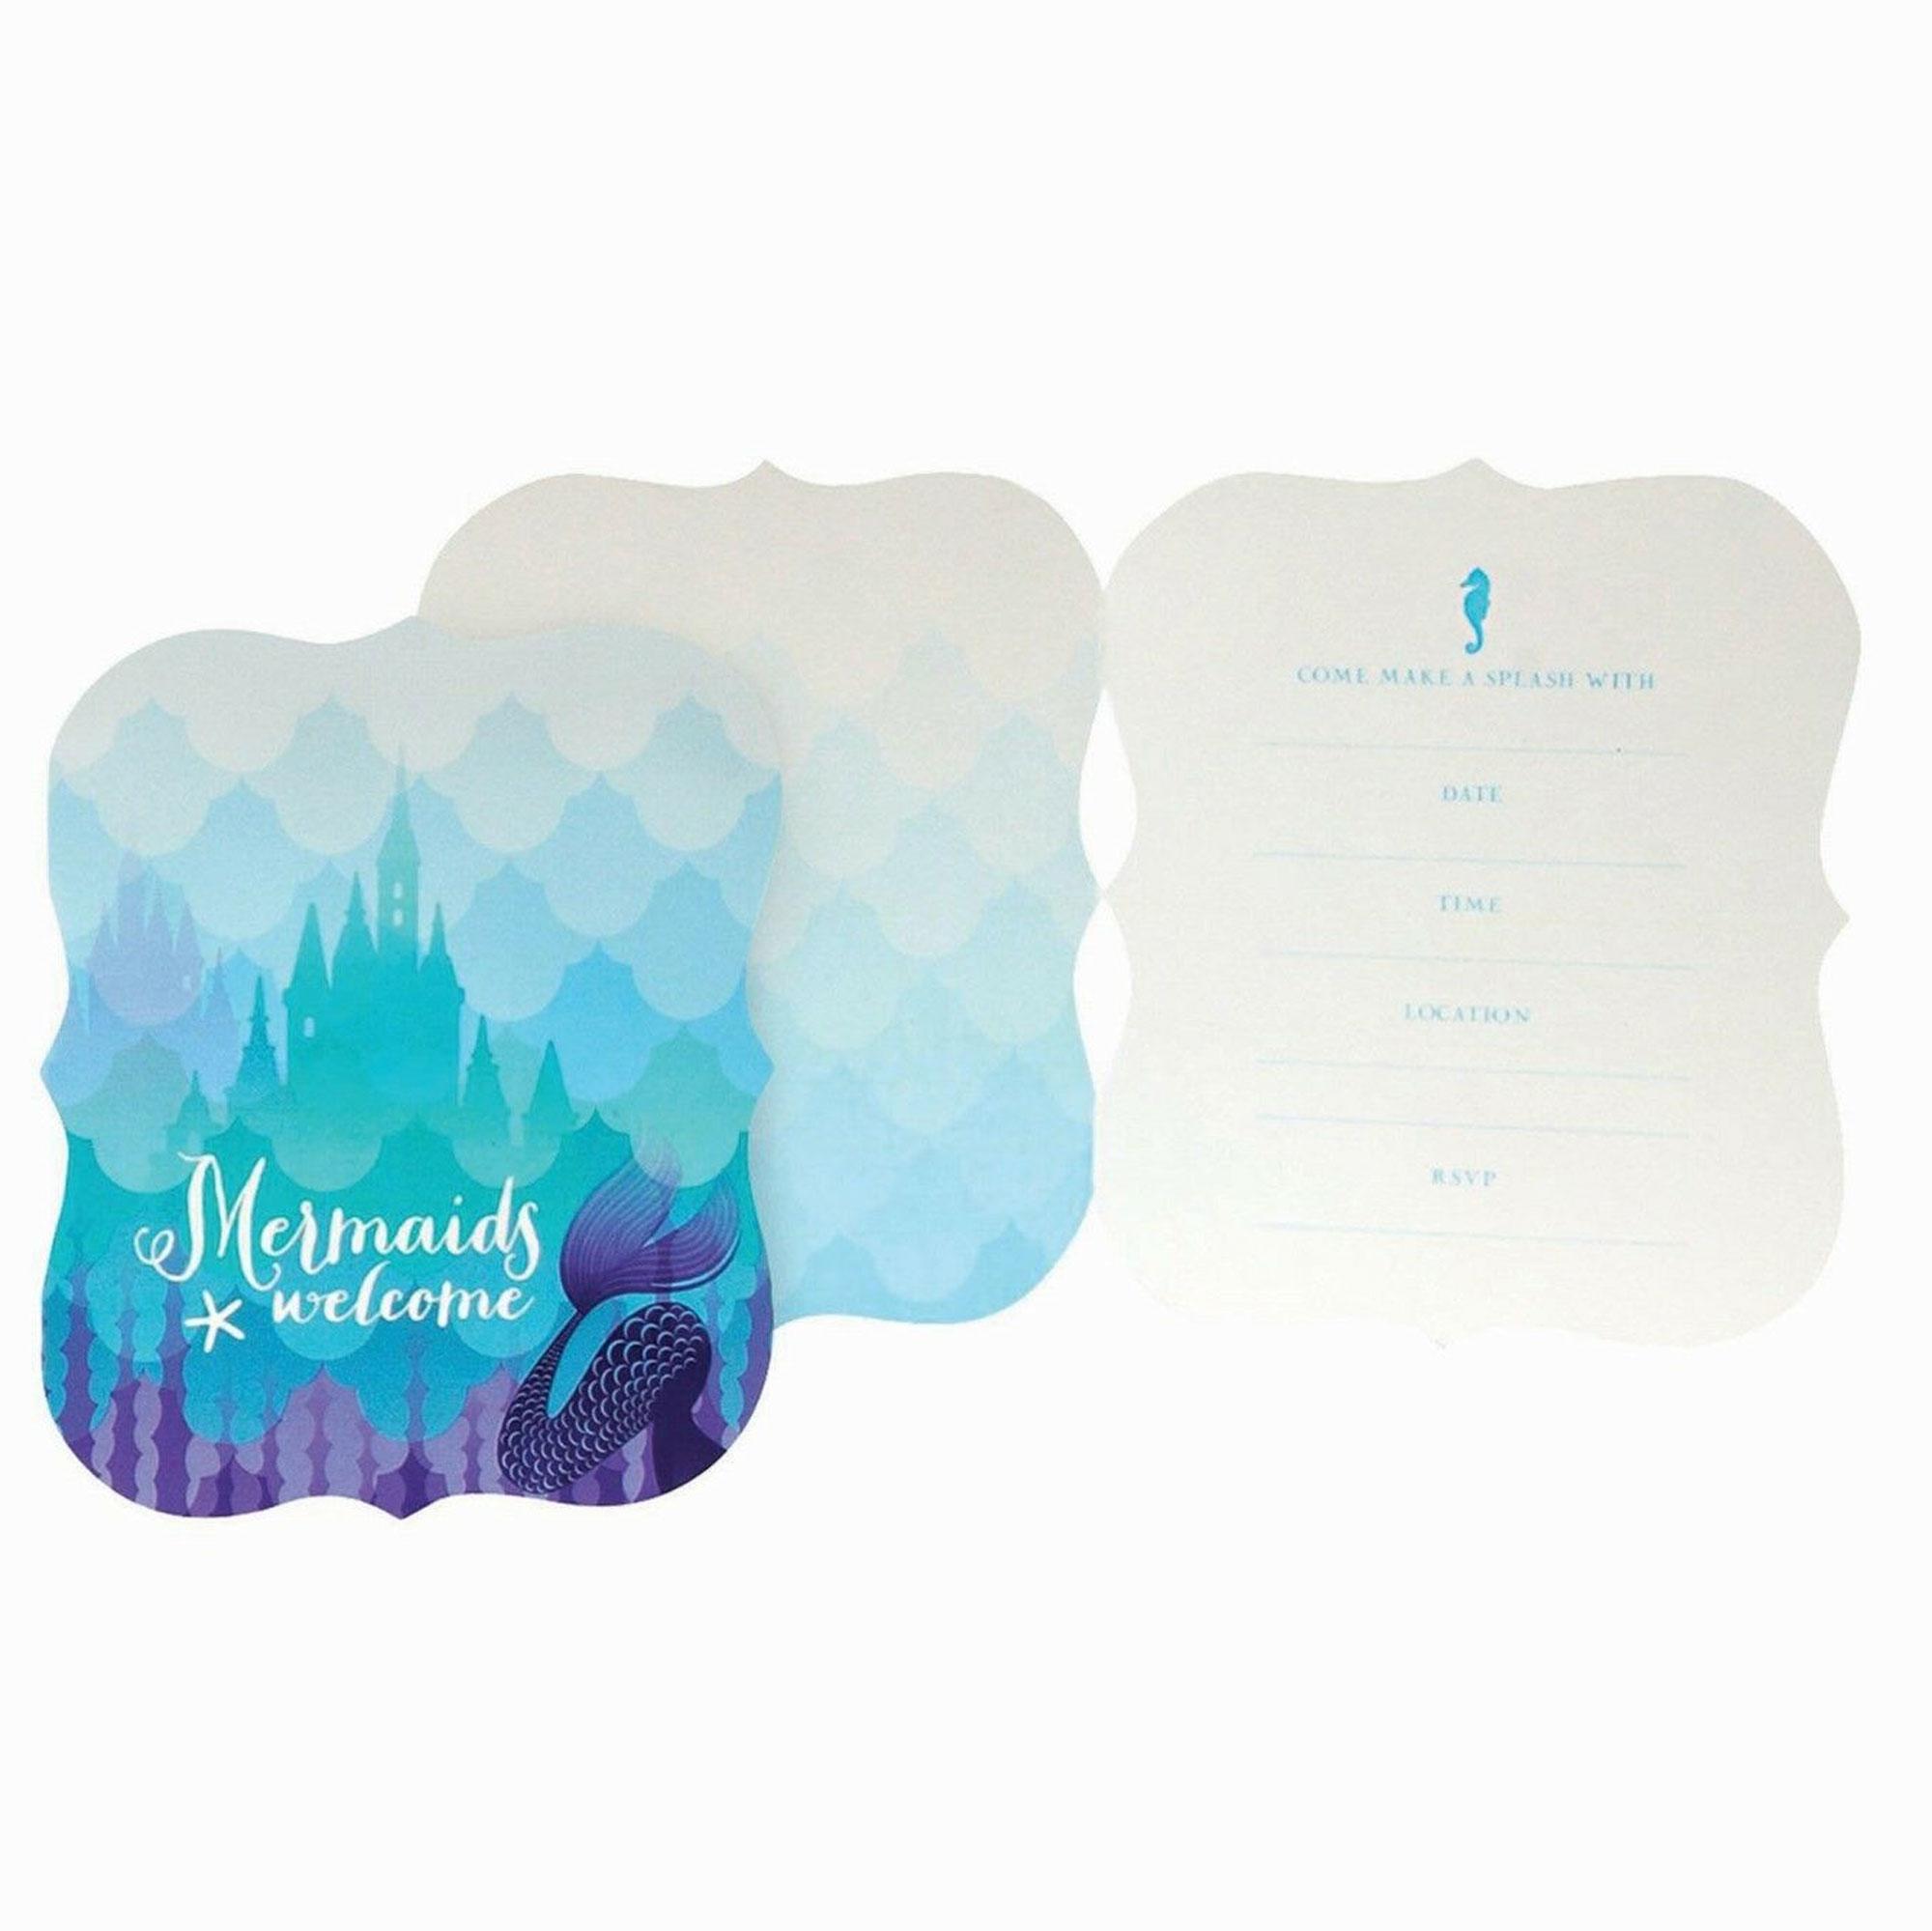 Mermaid Party Invitations 80659 available here at Karnival Costumes online party shop